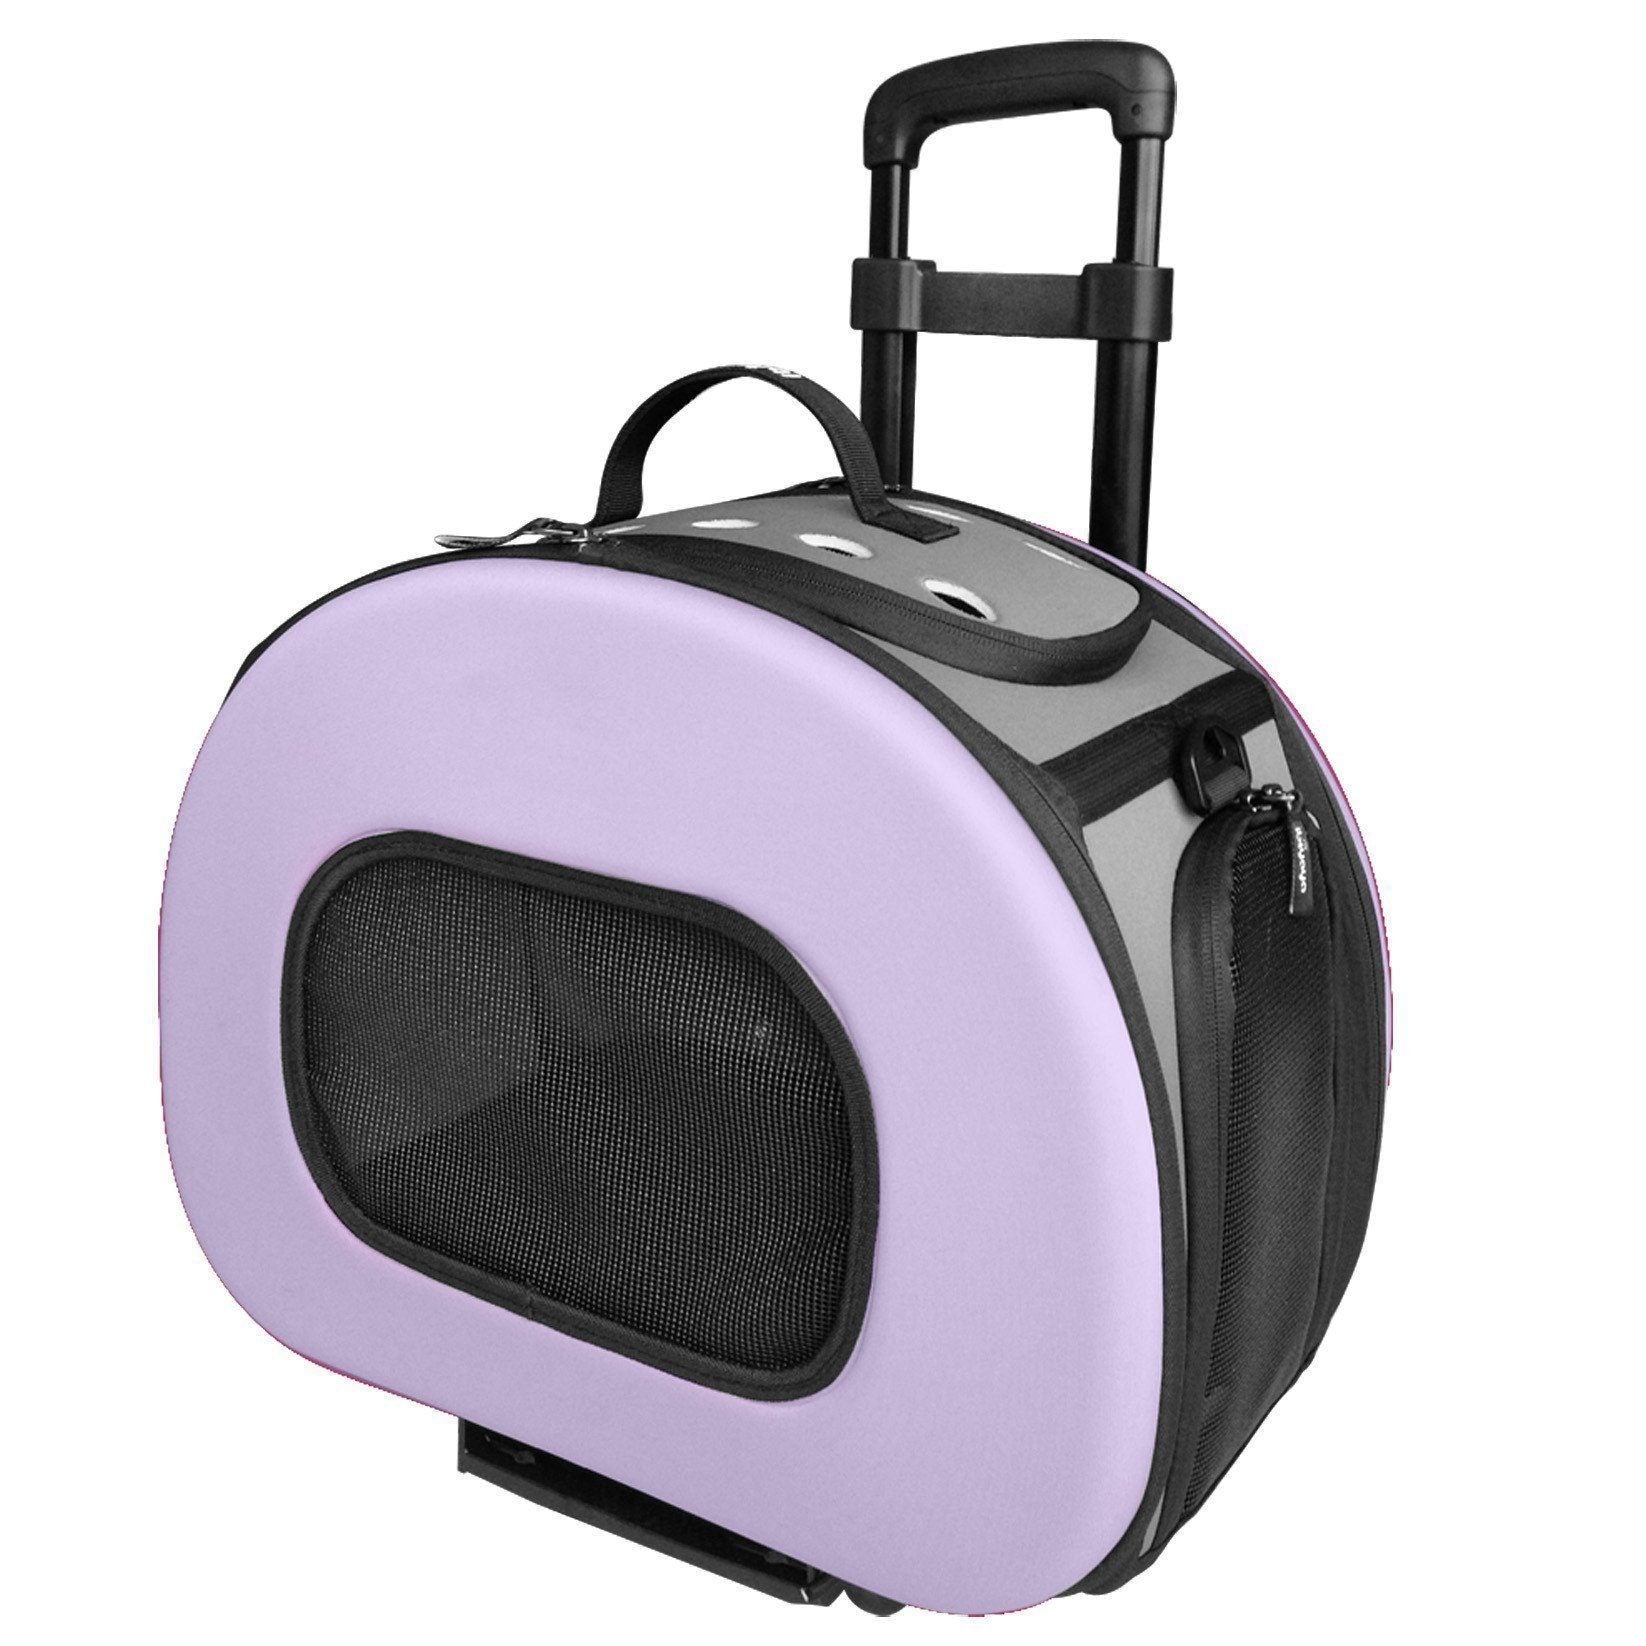 Pet Life ® 'Final Destination' Airline Approved 2-in-1 Tough-Shell Wheeled Collapsible Travel Fashion Pet Dog Carrier Crate Purple 